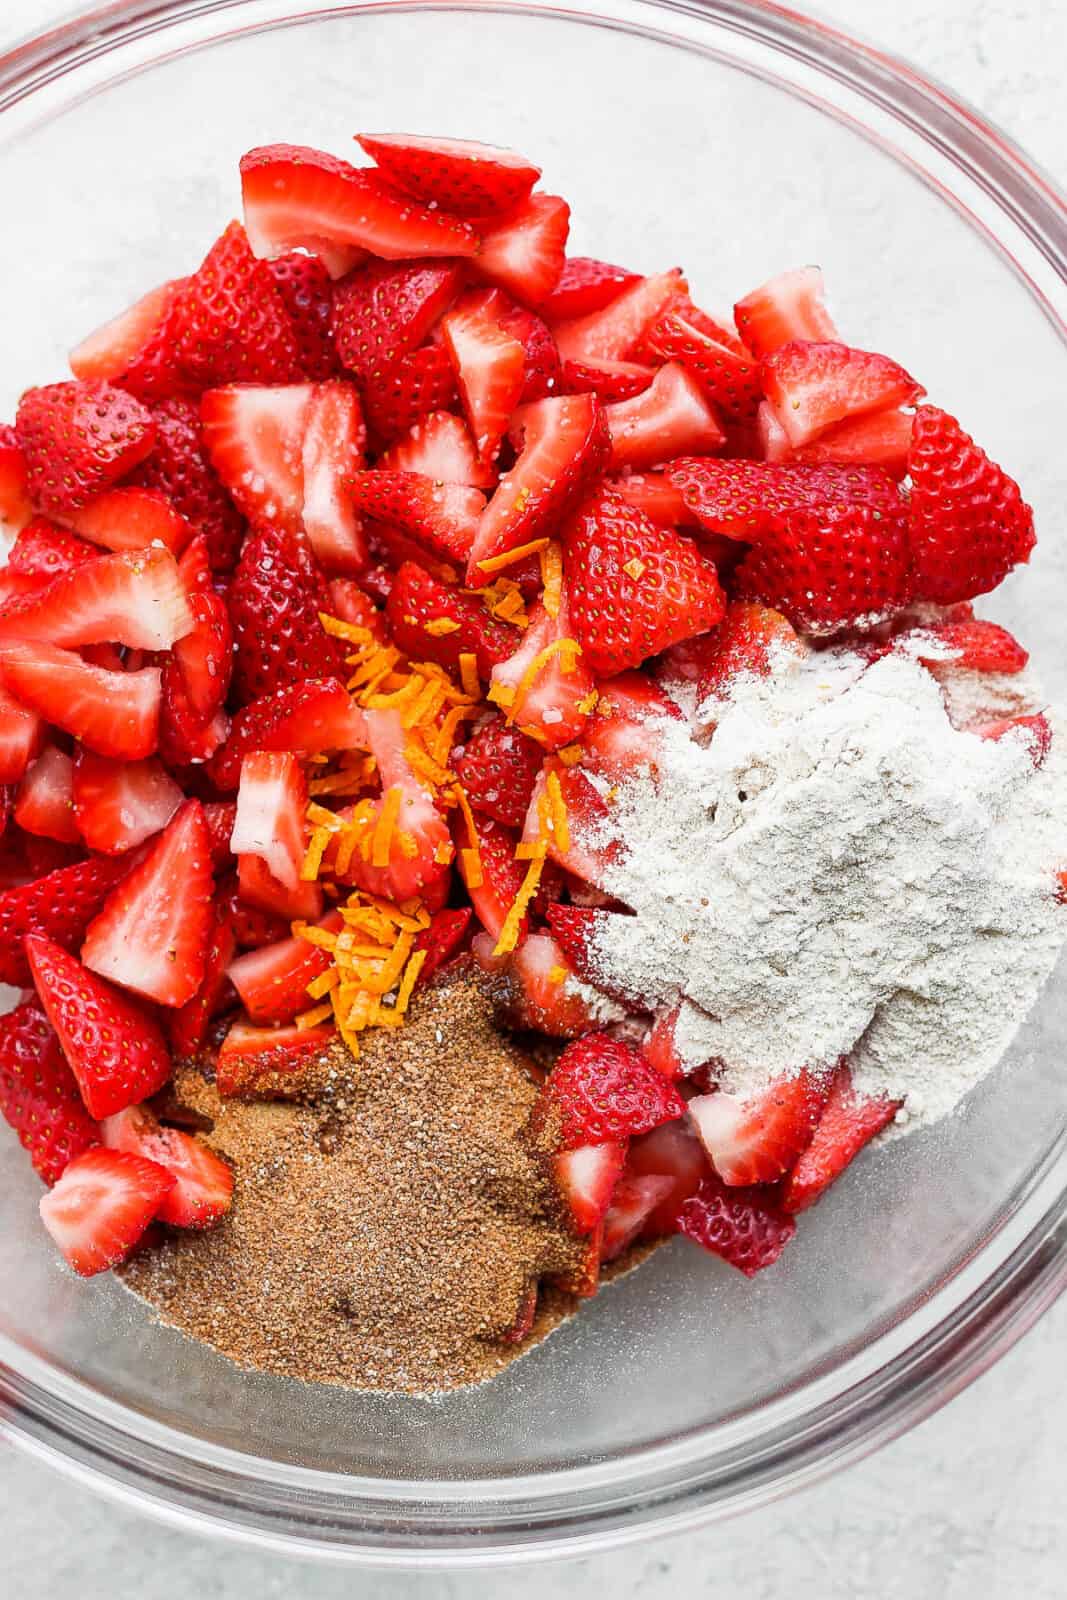 Strawberry filling ingredients in a bowl.